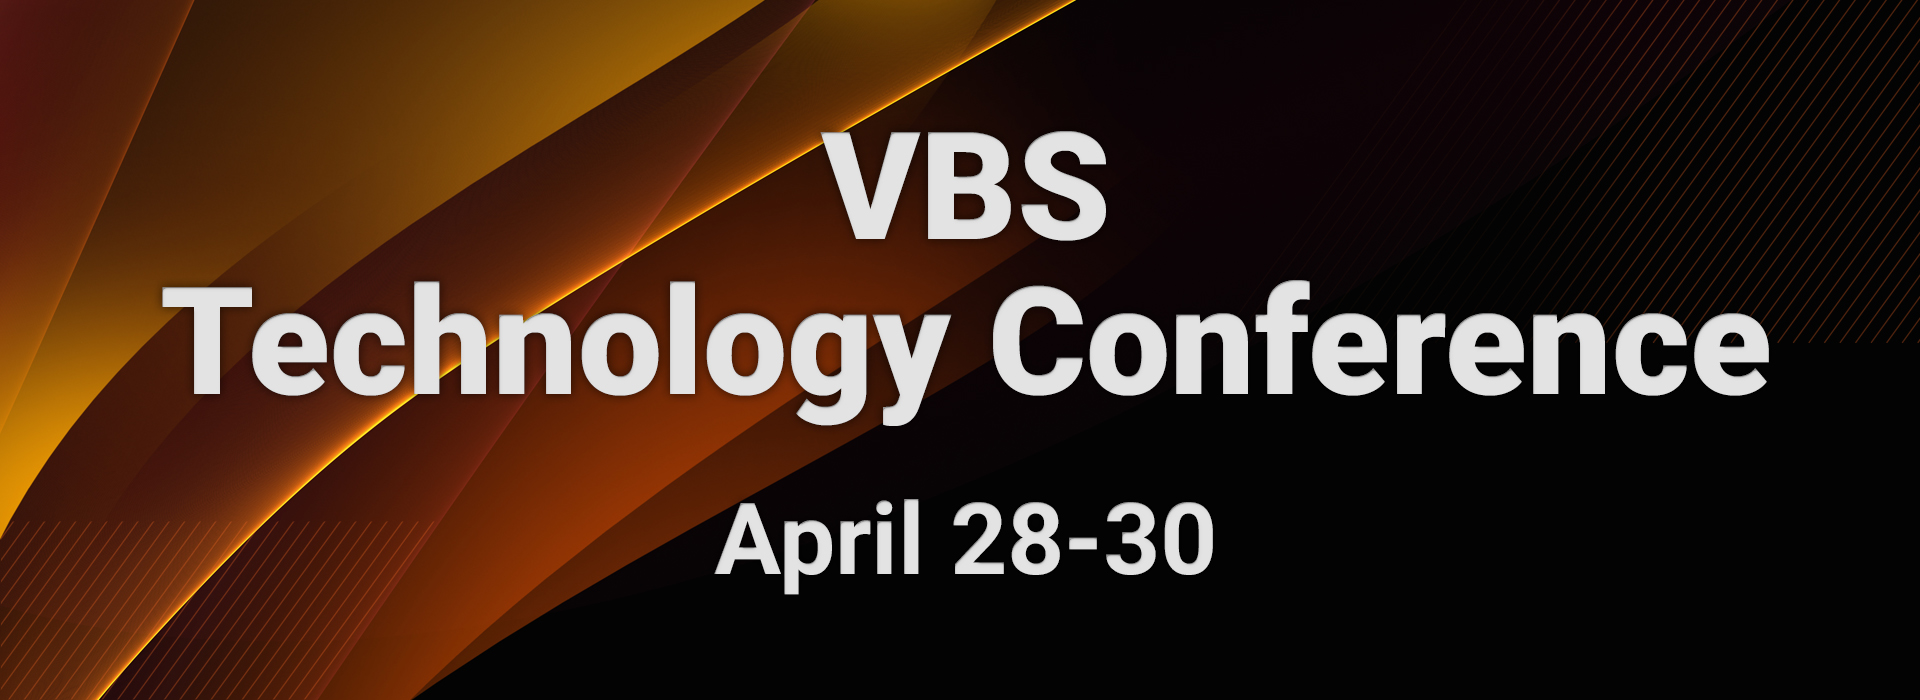 bisim_announces_the_first_ever_vbs_technology_conference_april_28_30